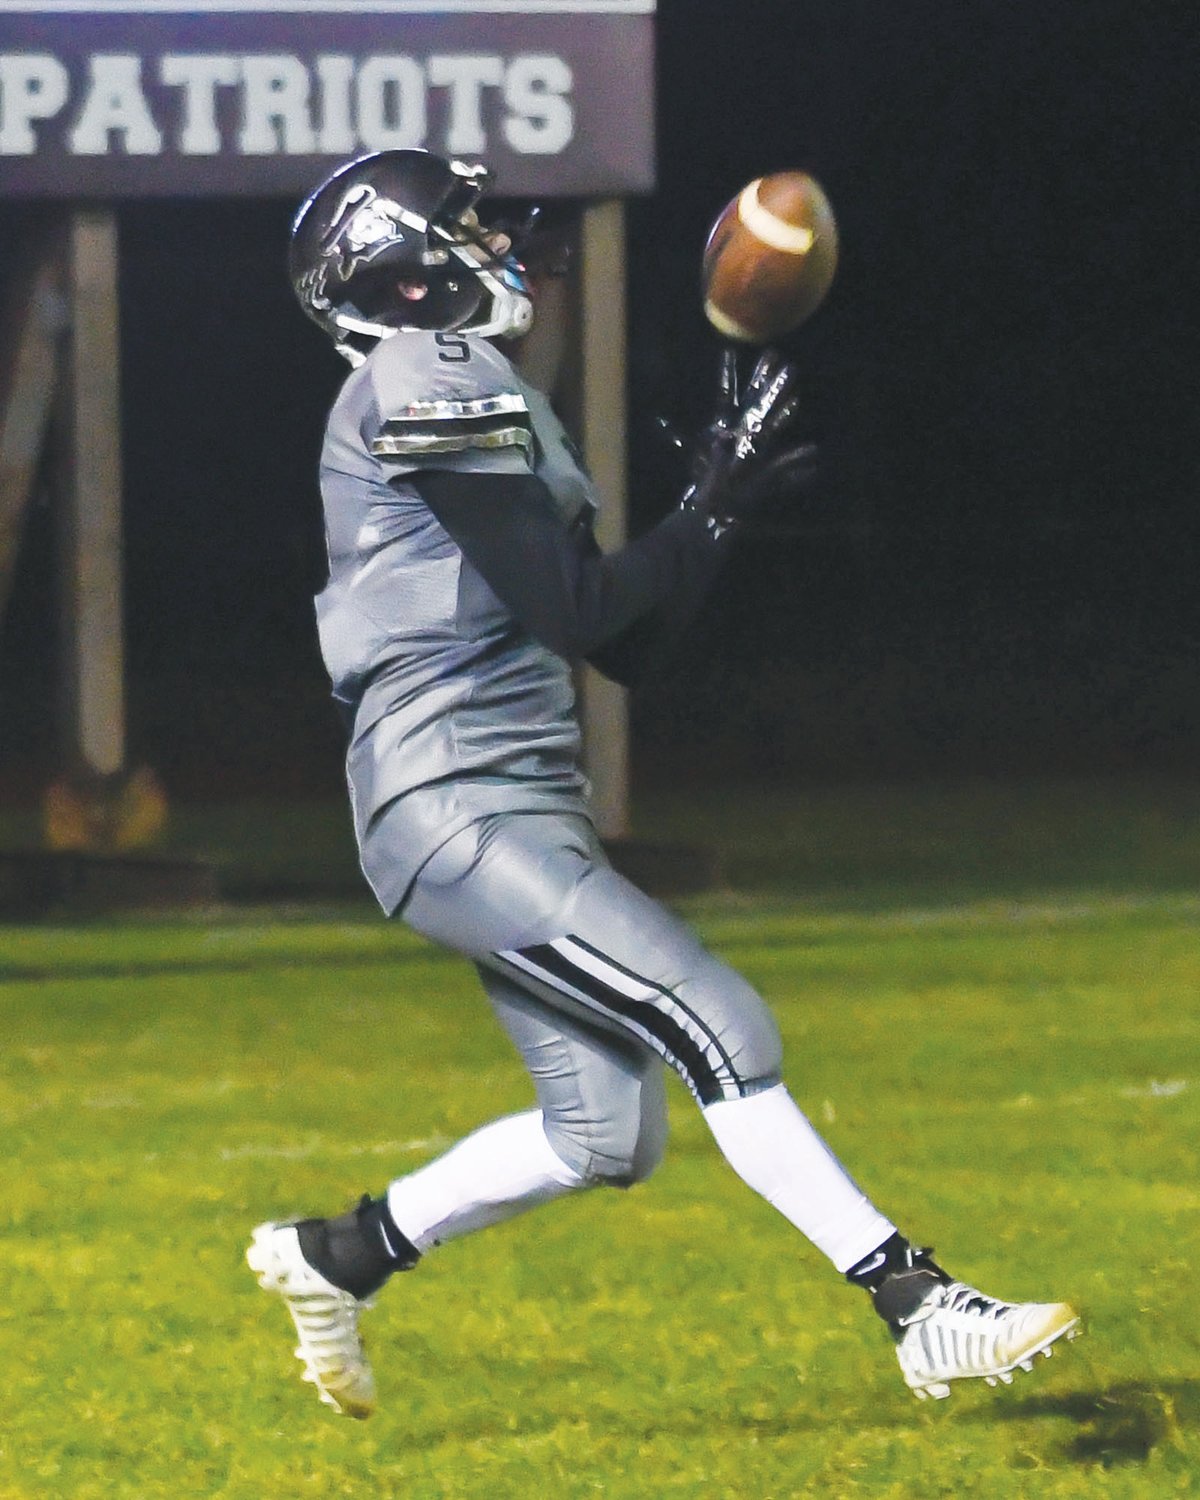 HAULING IT IN: Brandon Whitman makes a play downfield.